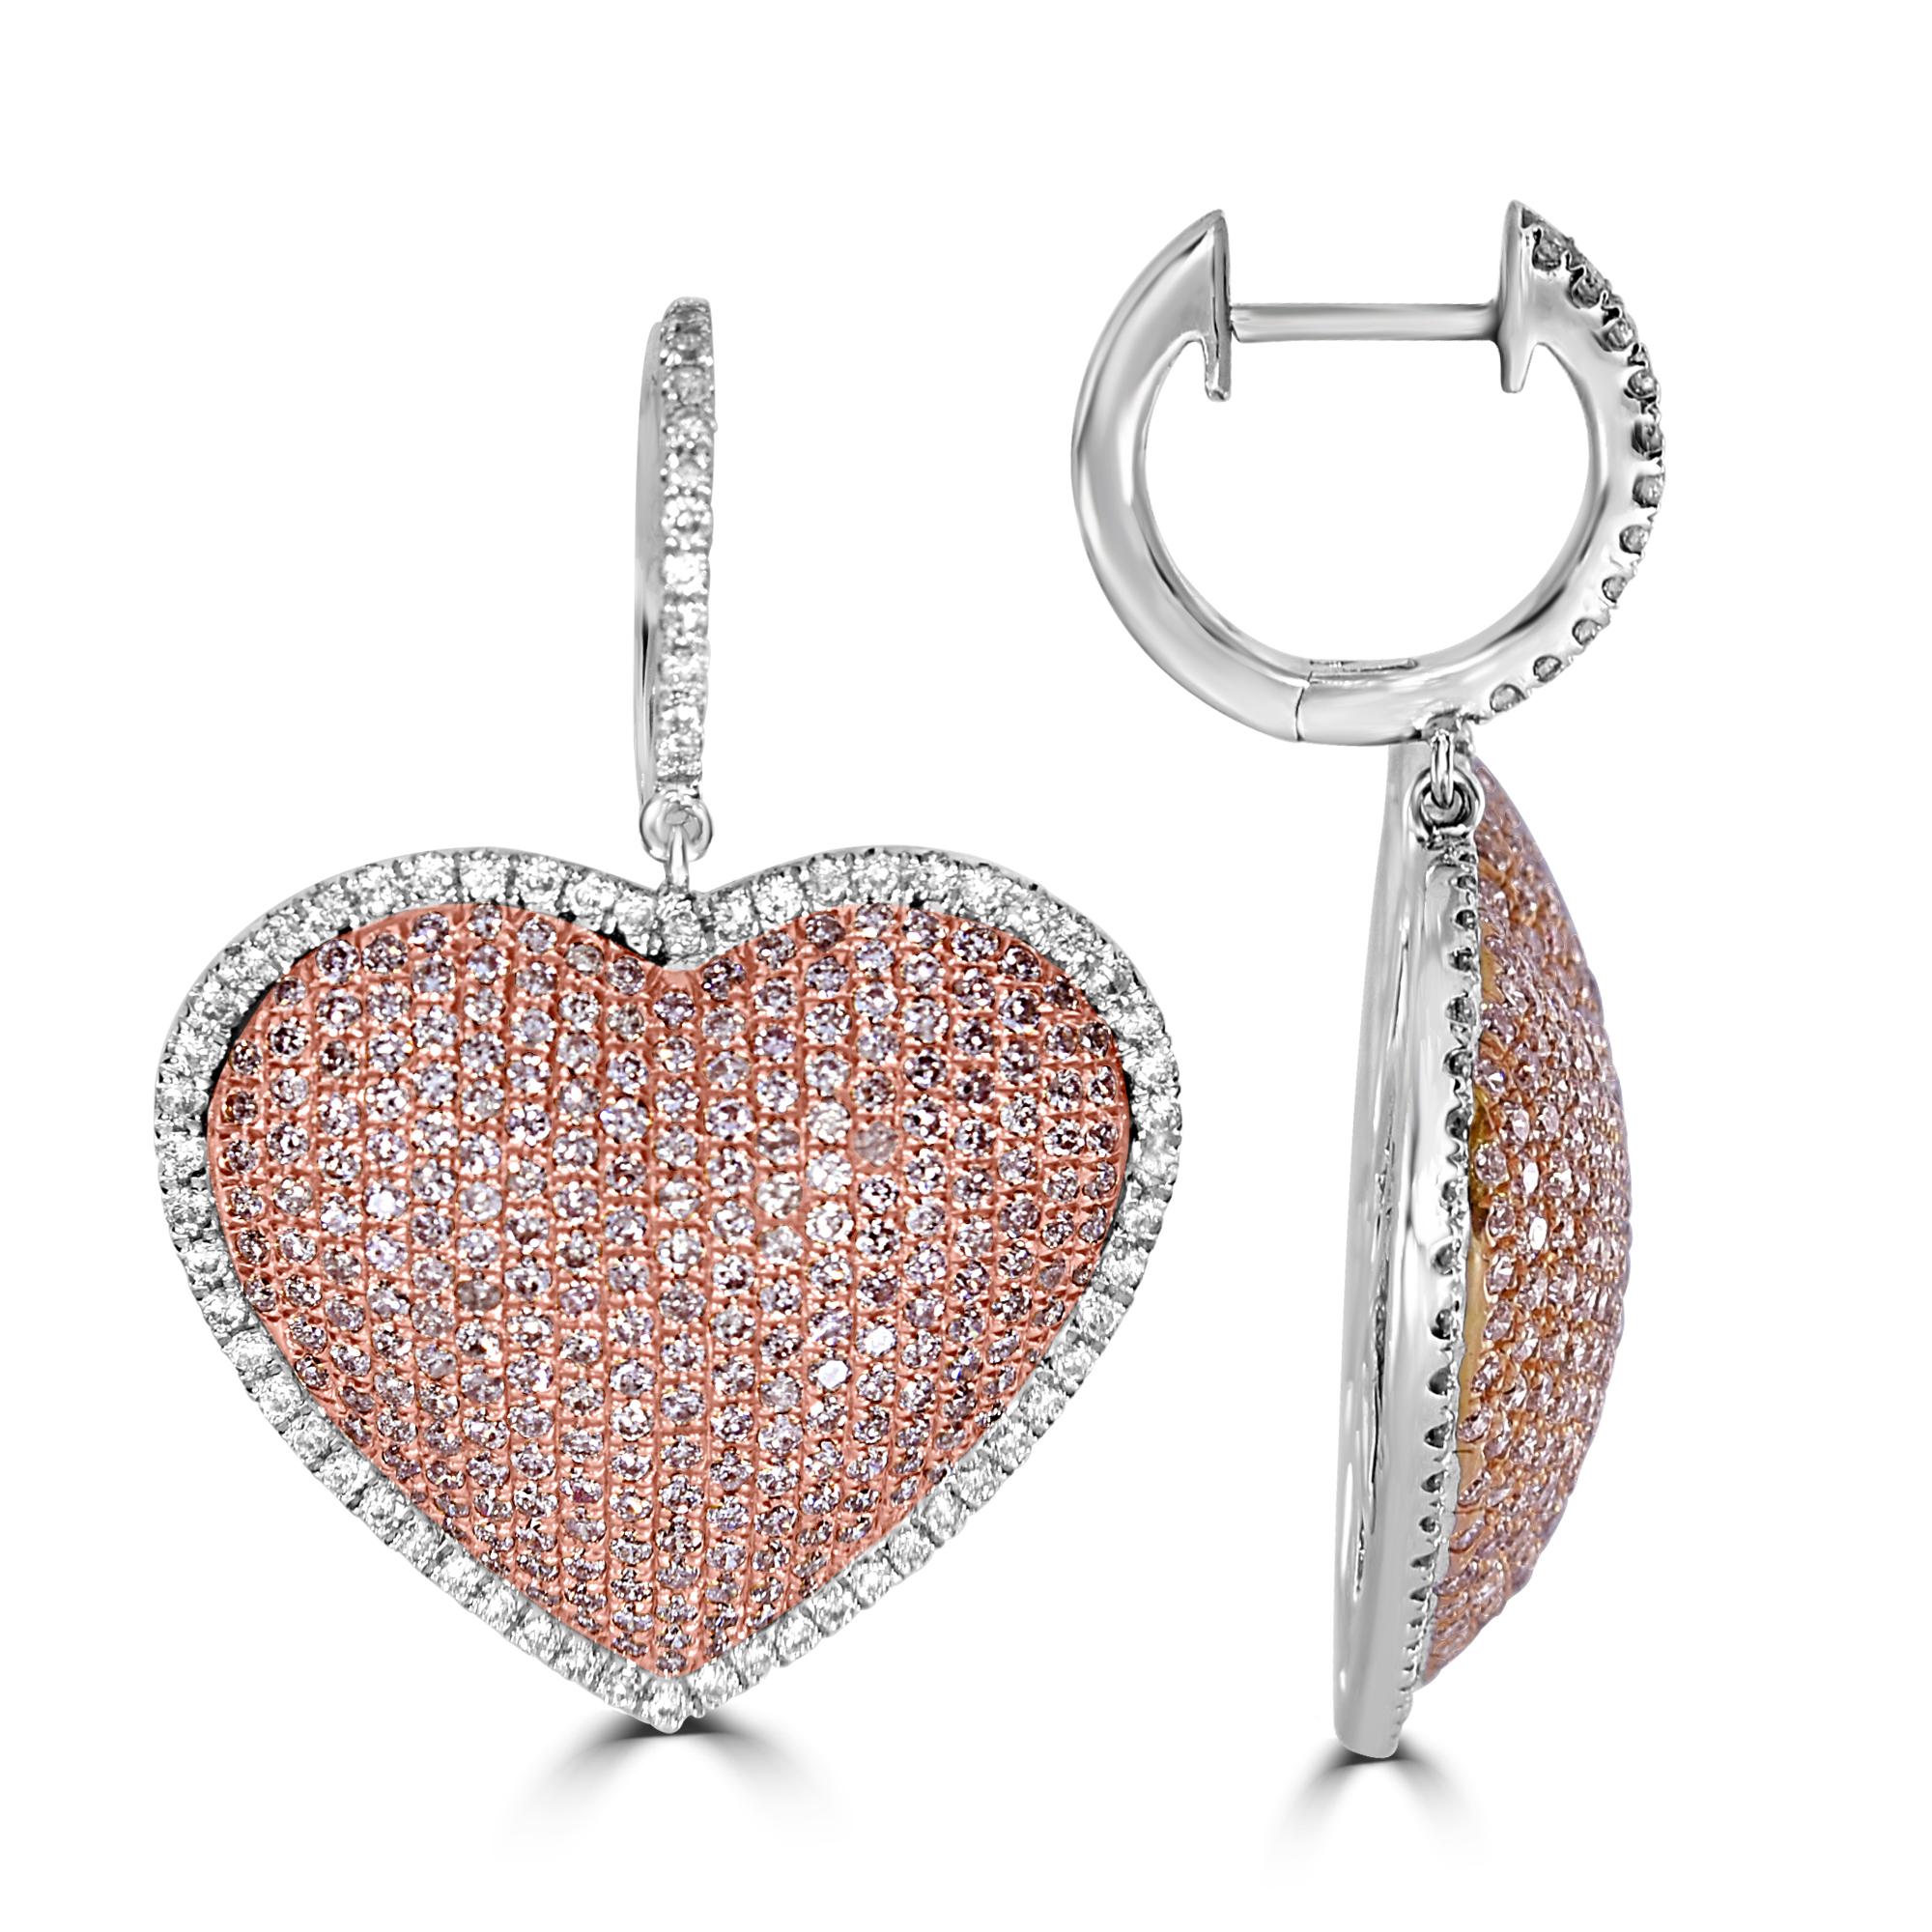 This beautiful Natural Pink Diamond Earrings by Almor Designs will melt the heart of any woman. These beautiful earrings have 3.35 Carats of Diamonds, .73 Carats are White Diamonds, and 2.62 Carats of Natural Pink Diamonds. The pink diamonds are set